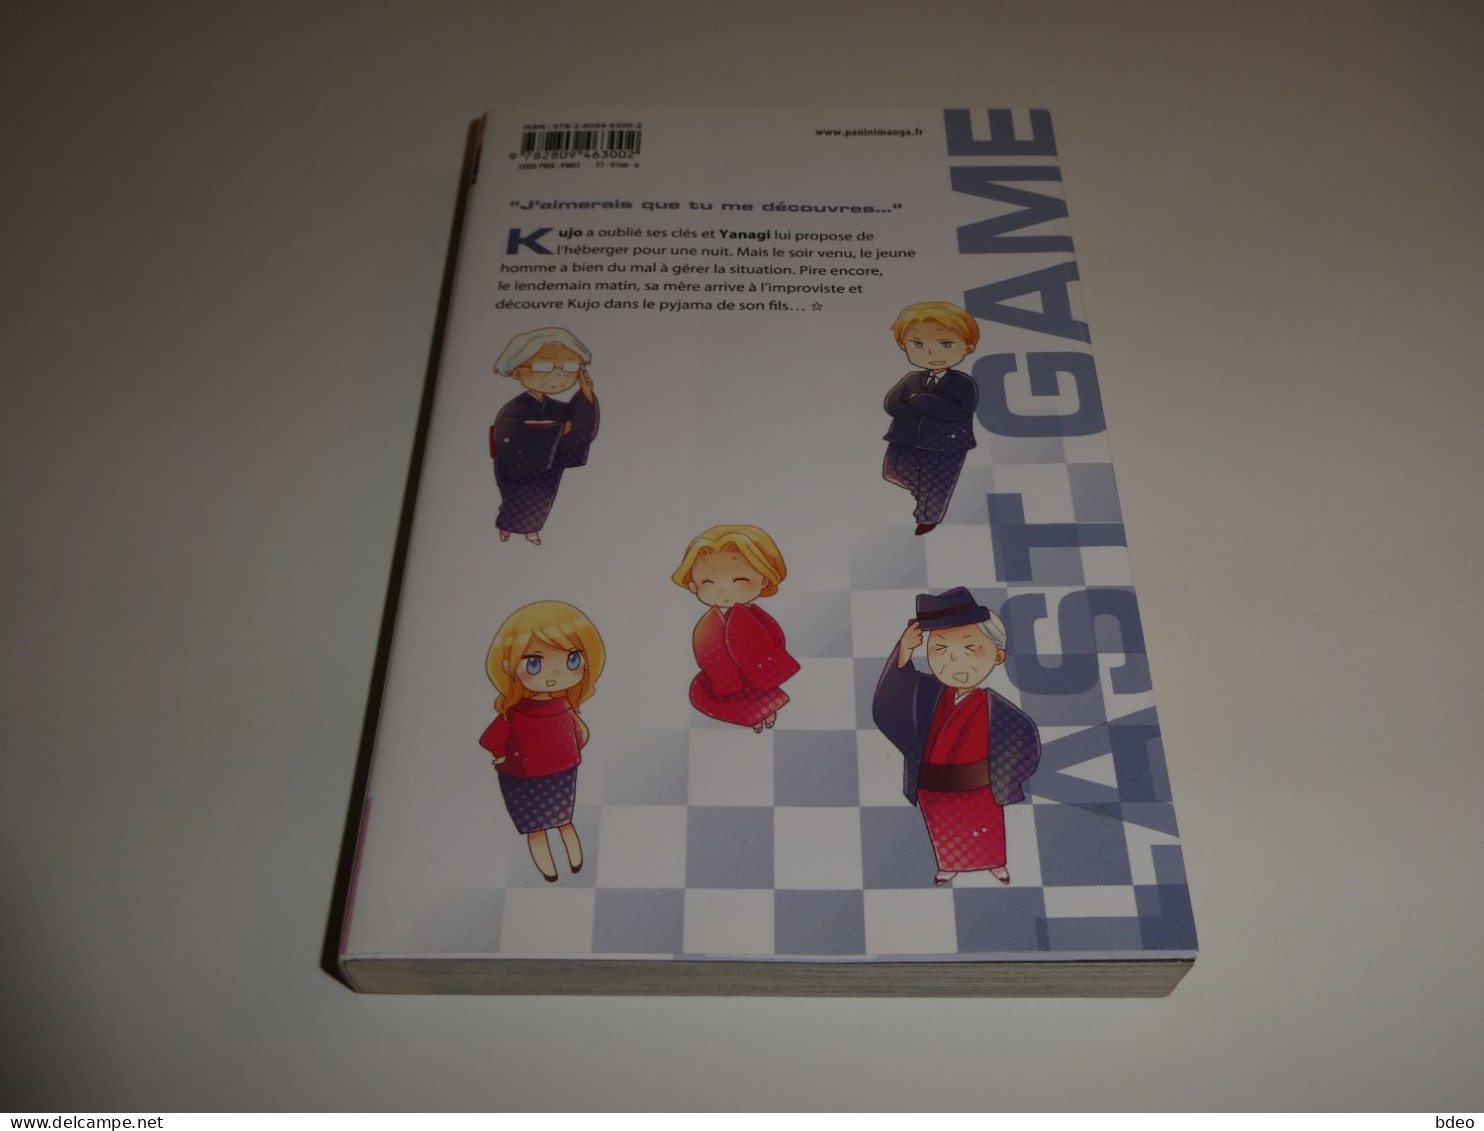 LAST GAME TOME 9 / TBE - Mangas Version Française